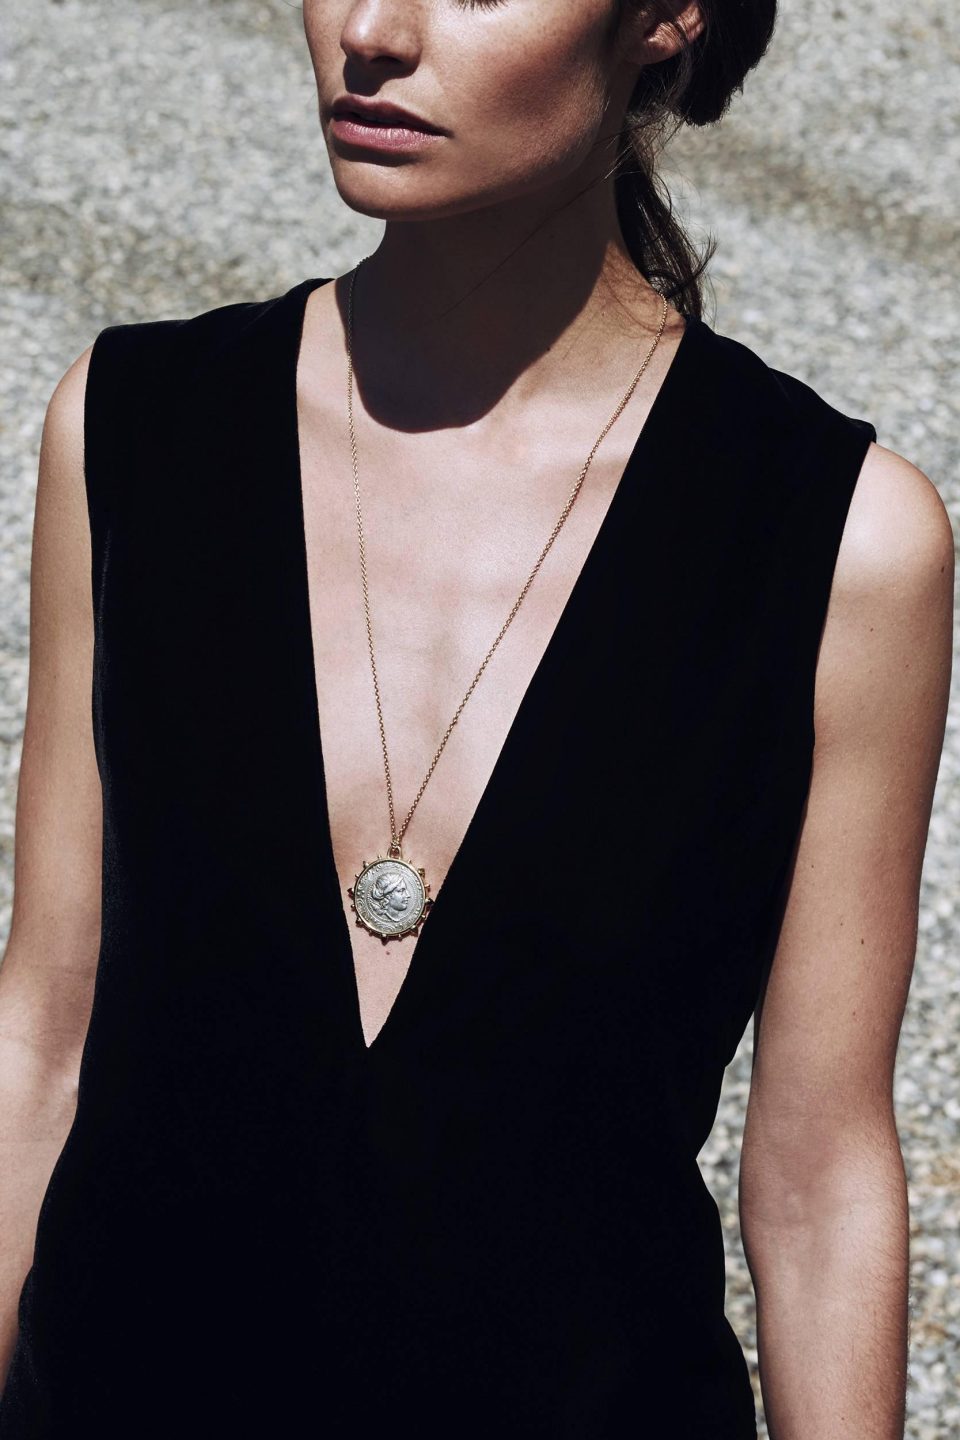 Ancient Coins Become Wearable Art in the Hands of Jewelry Designer Benedetta Dubini